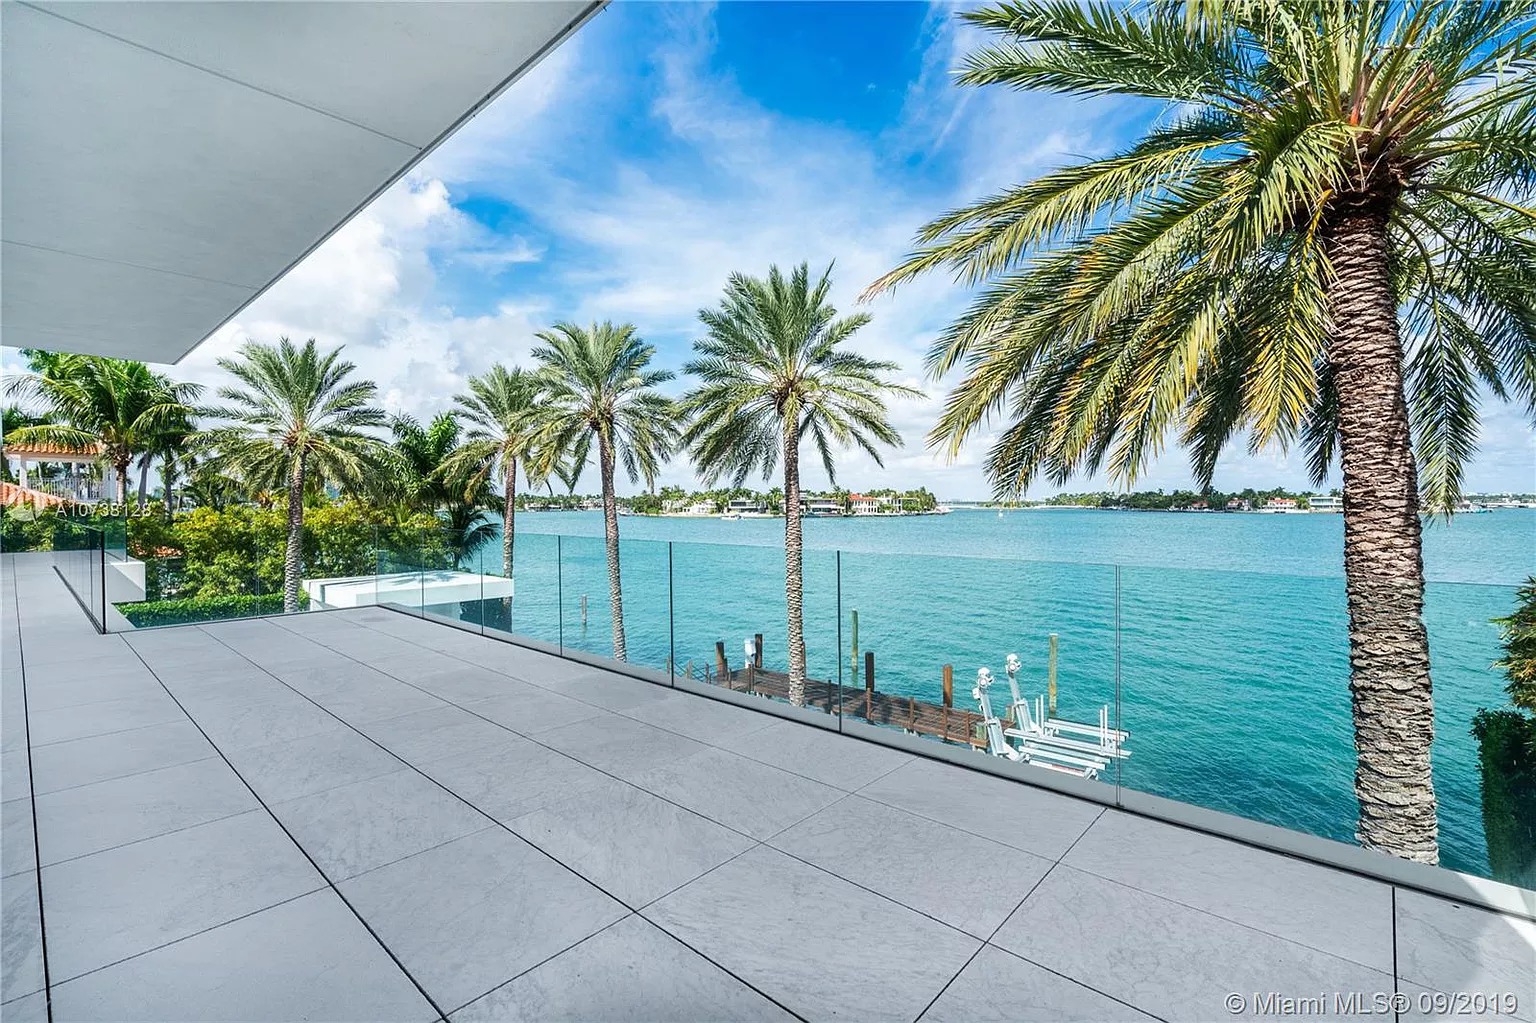 101 N Hibiscus Dr, Miami Beach, FL 33139 - $25,900,000 home for sale, house images, photos and pics gallery